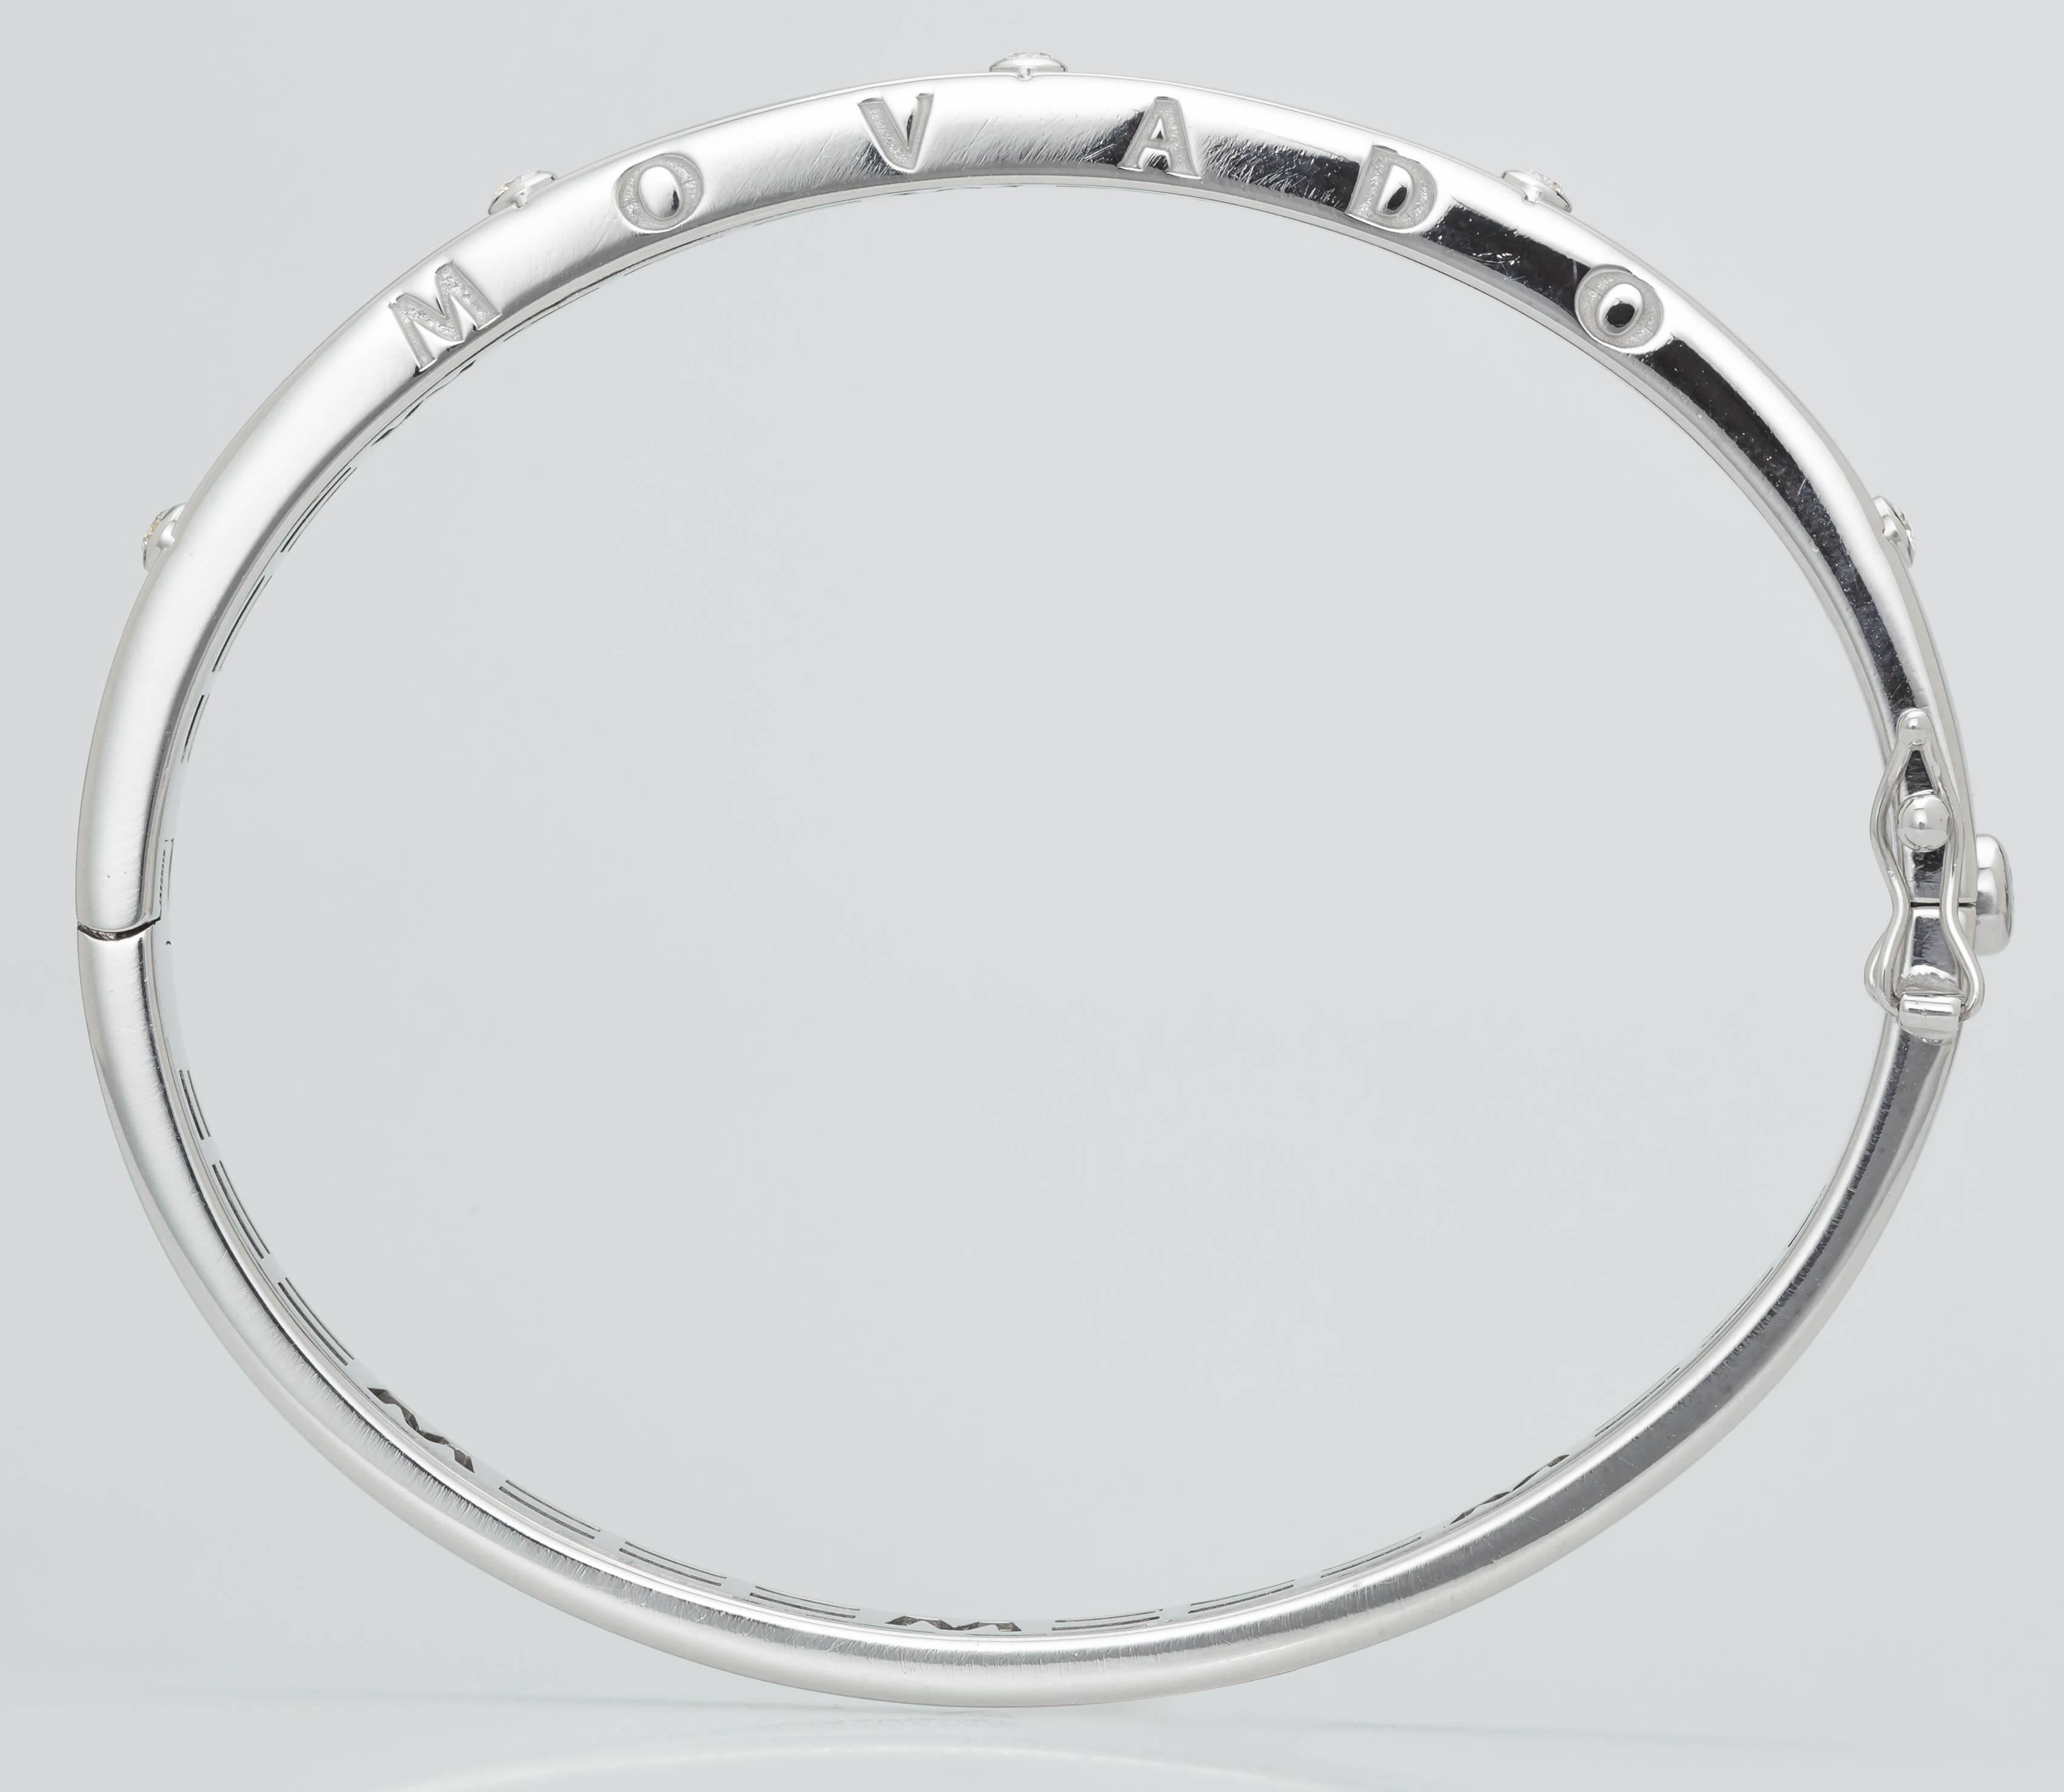 This 18K white gold Mavado bracelet is set with 5 diamonds totaling 0.15ct.  It is stamped on the side with 